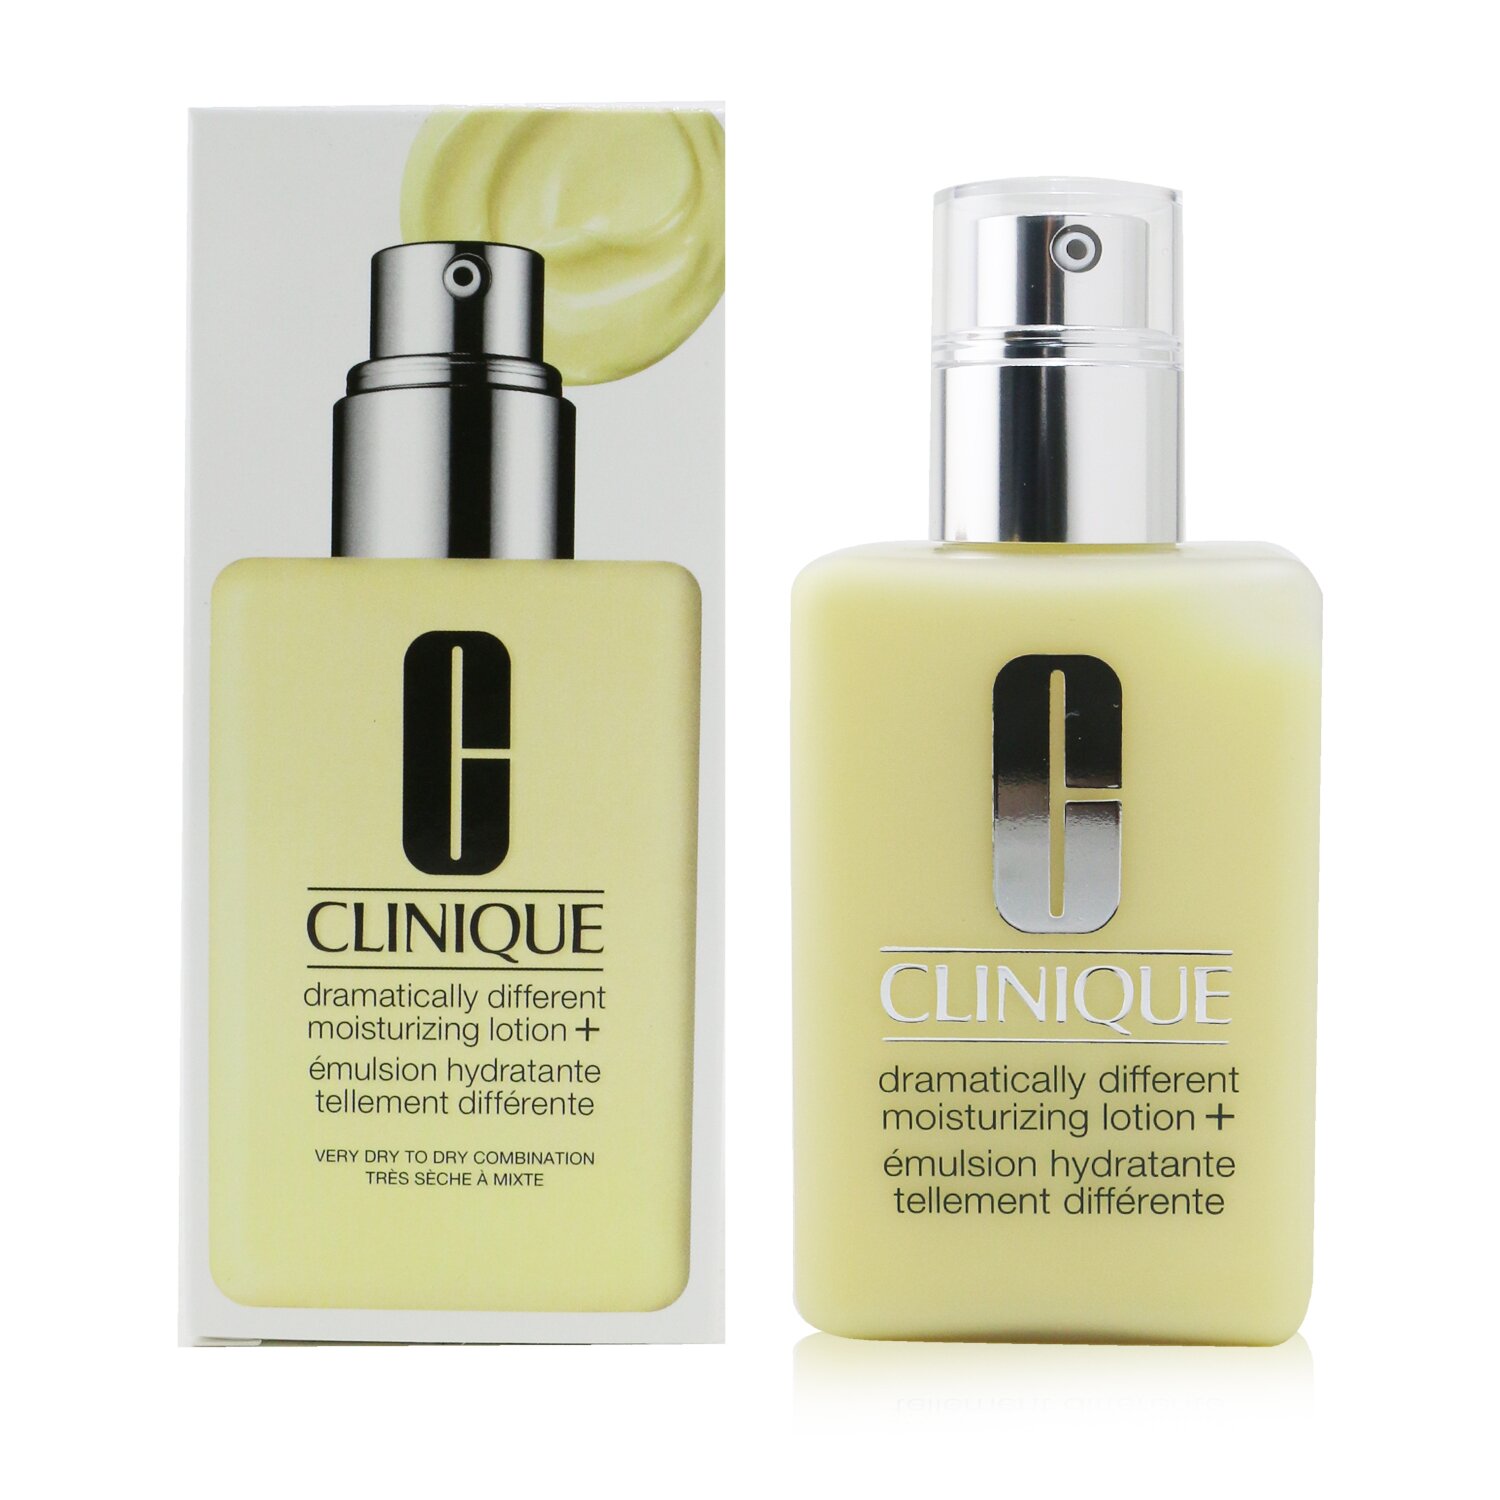 Different moisturizing. Clinique dramatically different Moisturizing. Clinique ID dramatically different Moisturizing Lotion+ Emulsion hydratante tellement differente. Clinique dramatically different Moisturizing Lotion+. Clinique dramatically different.